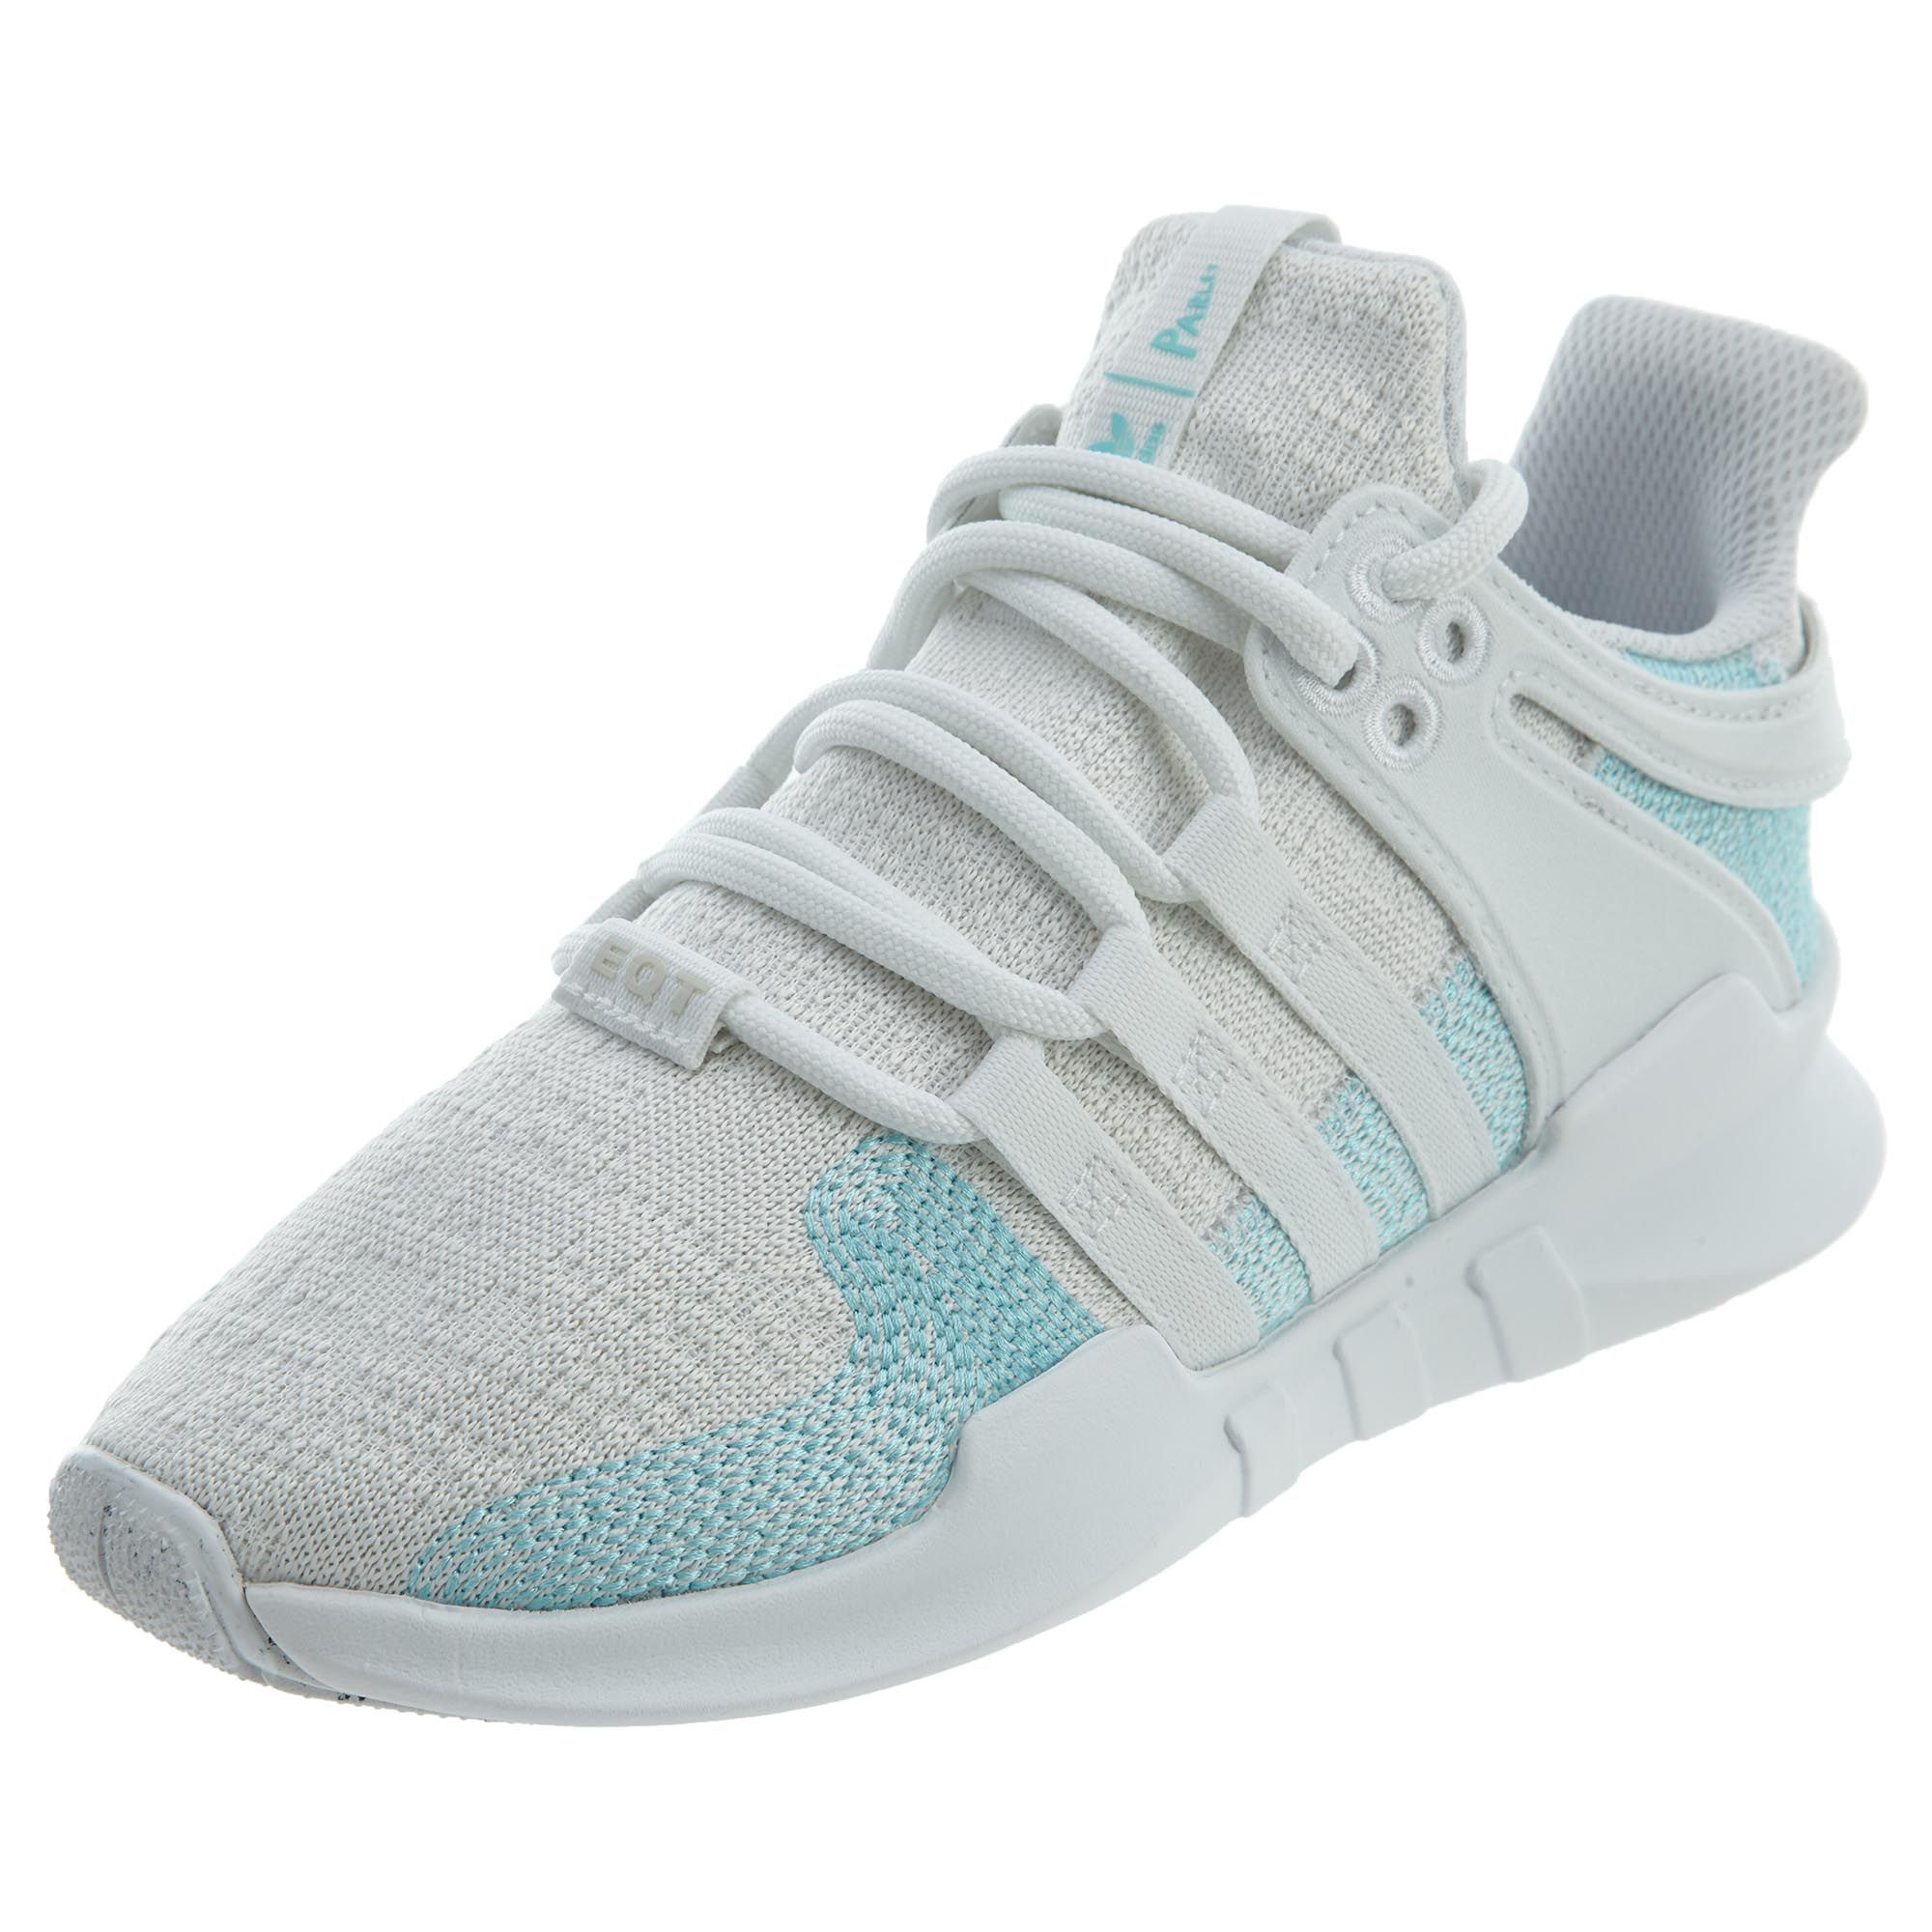 Adidas Eqt Support Adv Ck Parley Mens Style : Ac7804-Wht/Blue